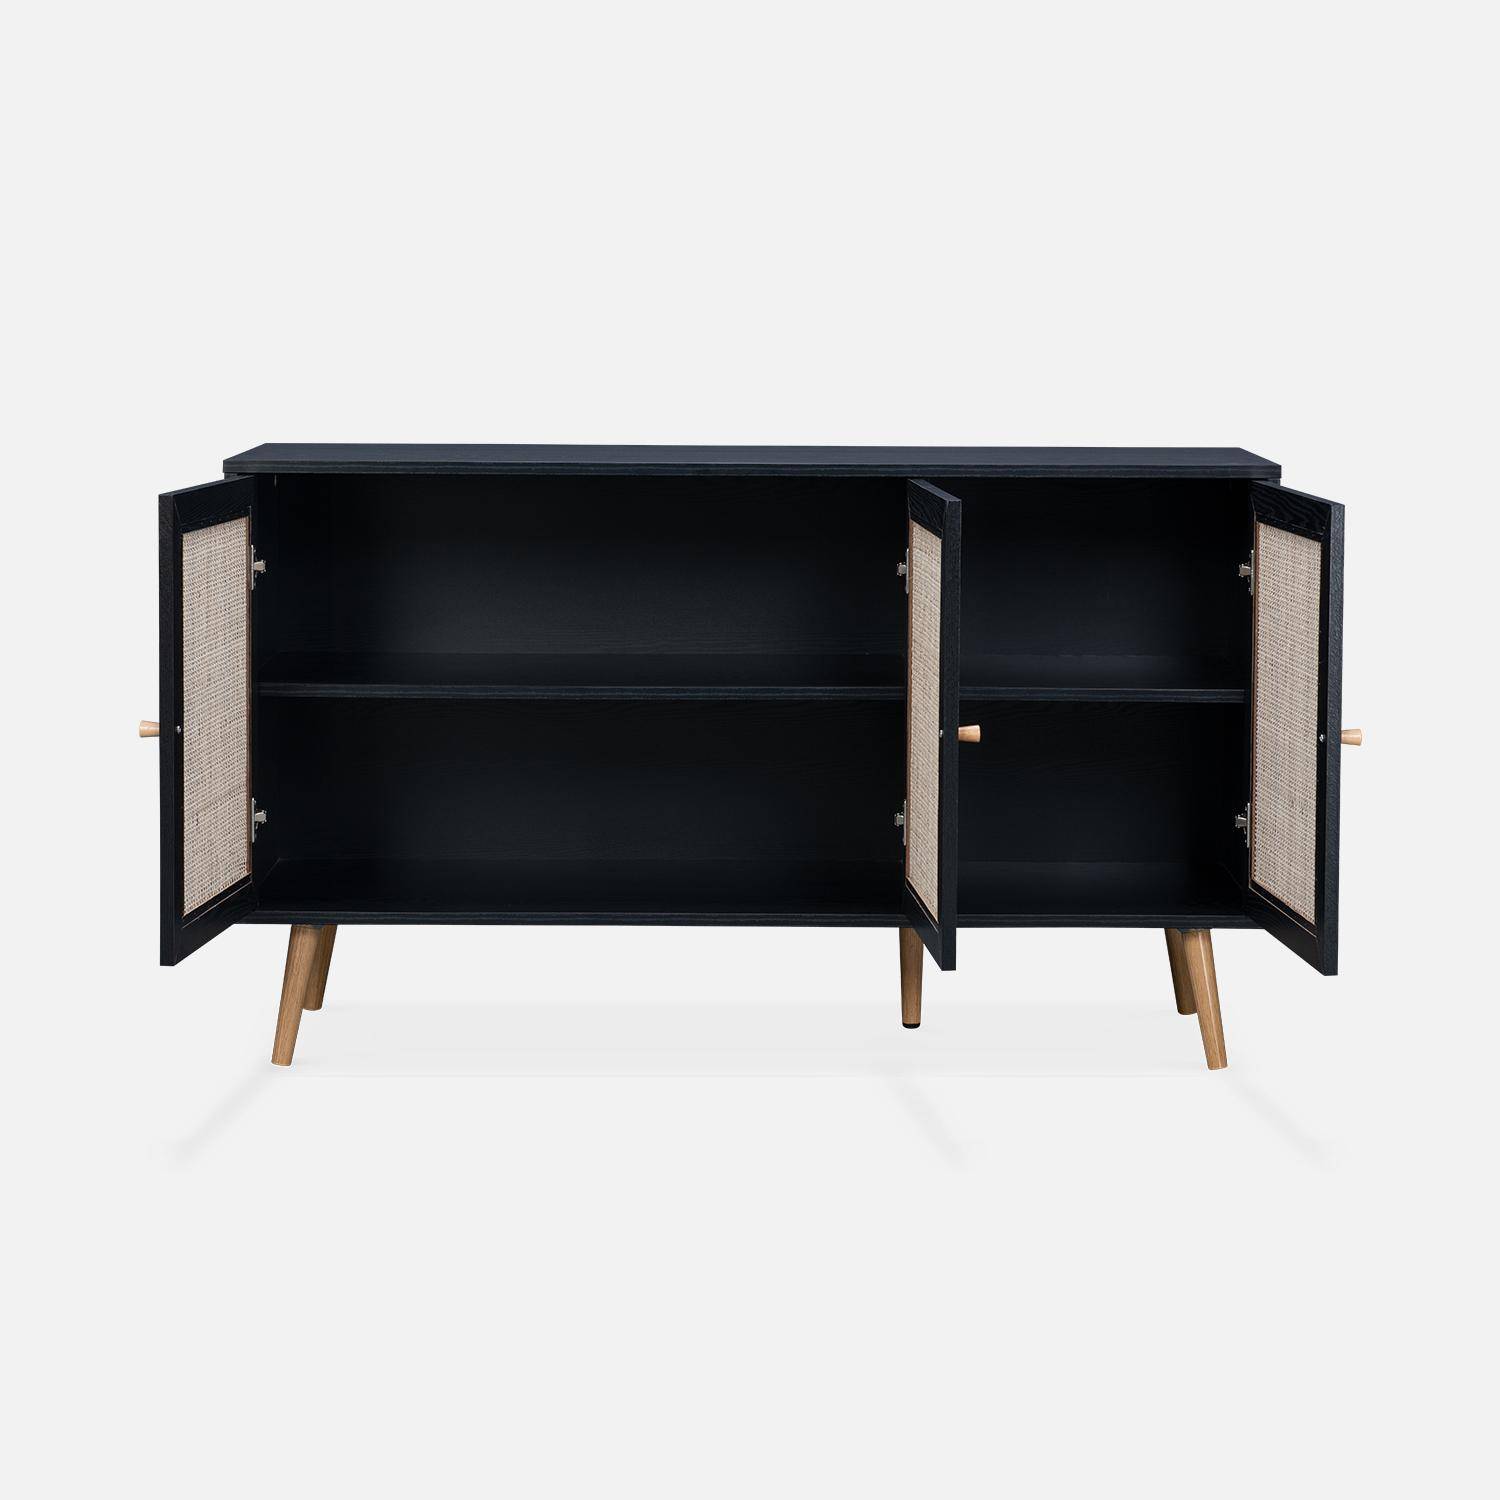 Wooden and cane rattan detail sideboard with 3 doors, 2 shelves, Scandi-style legs, 120x39x70cm - Boheme - Black Photo5